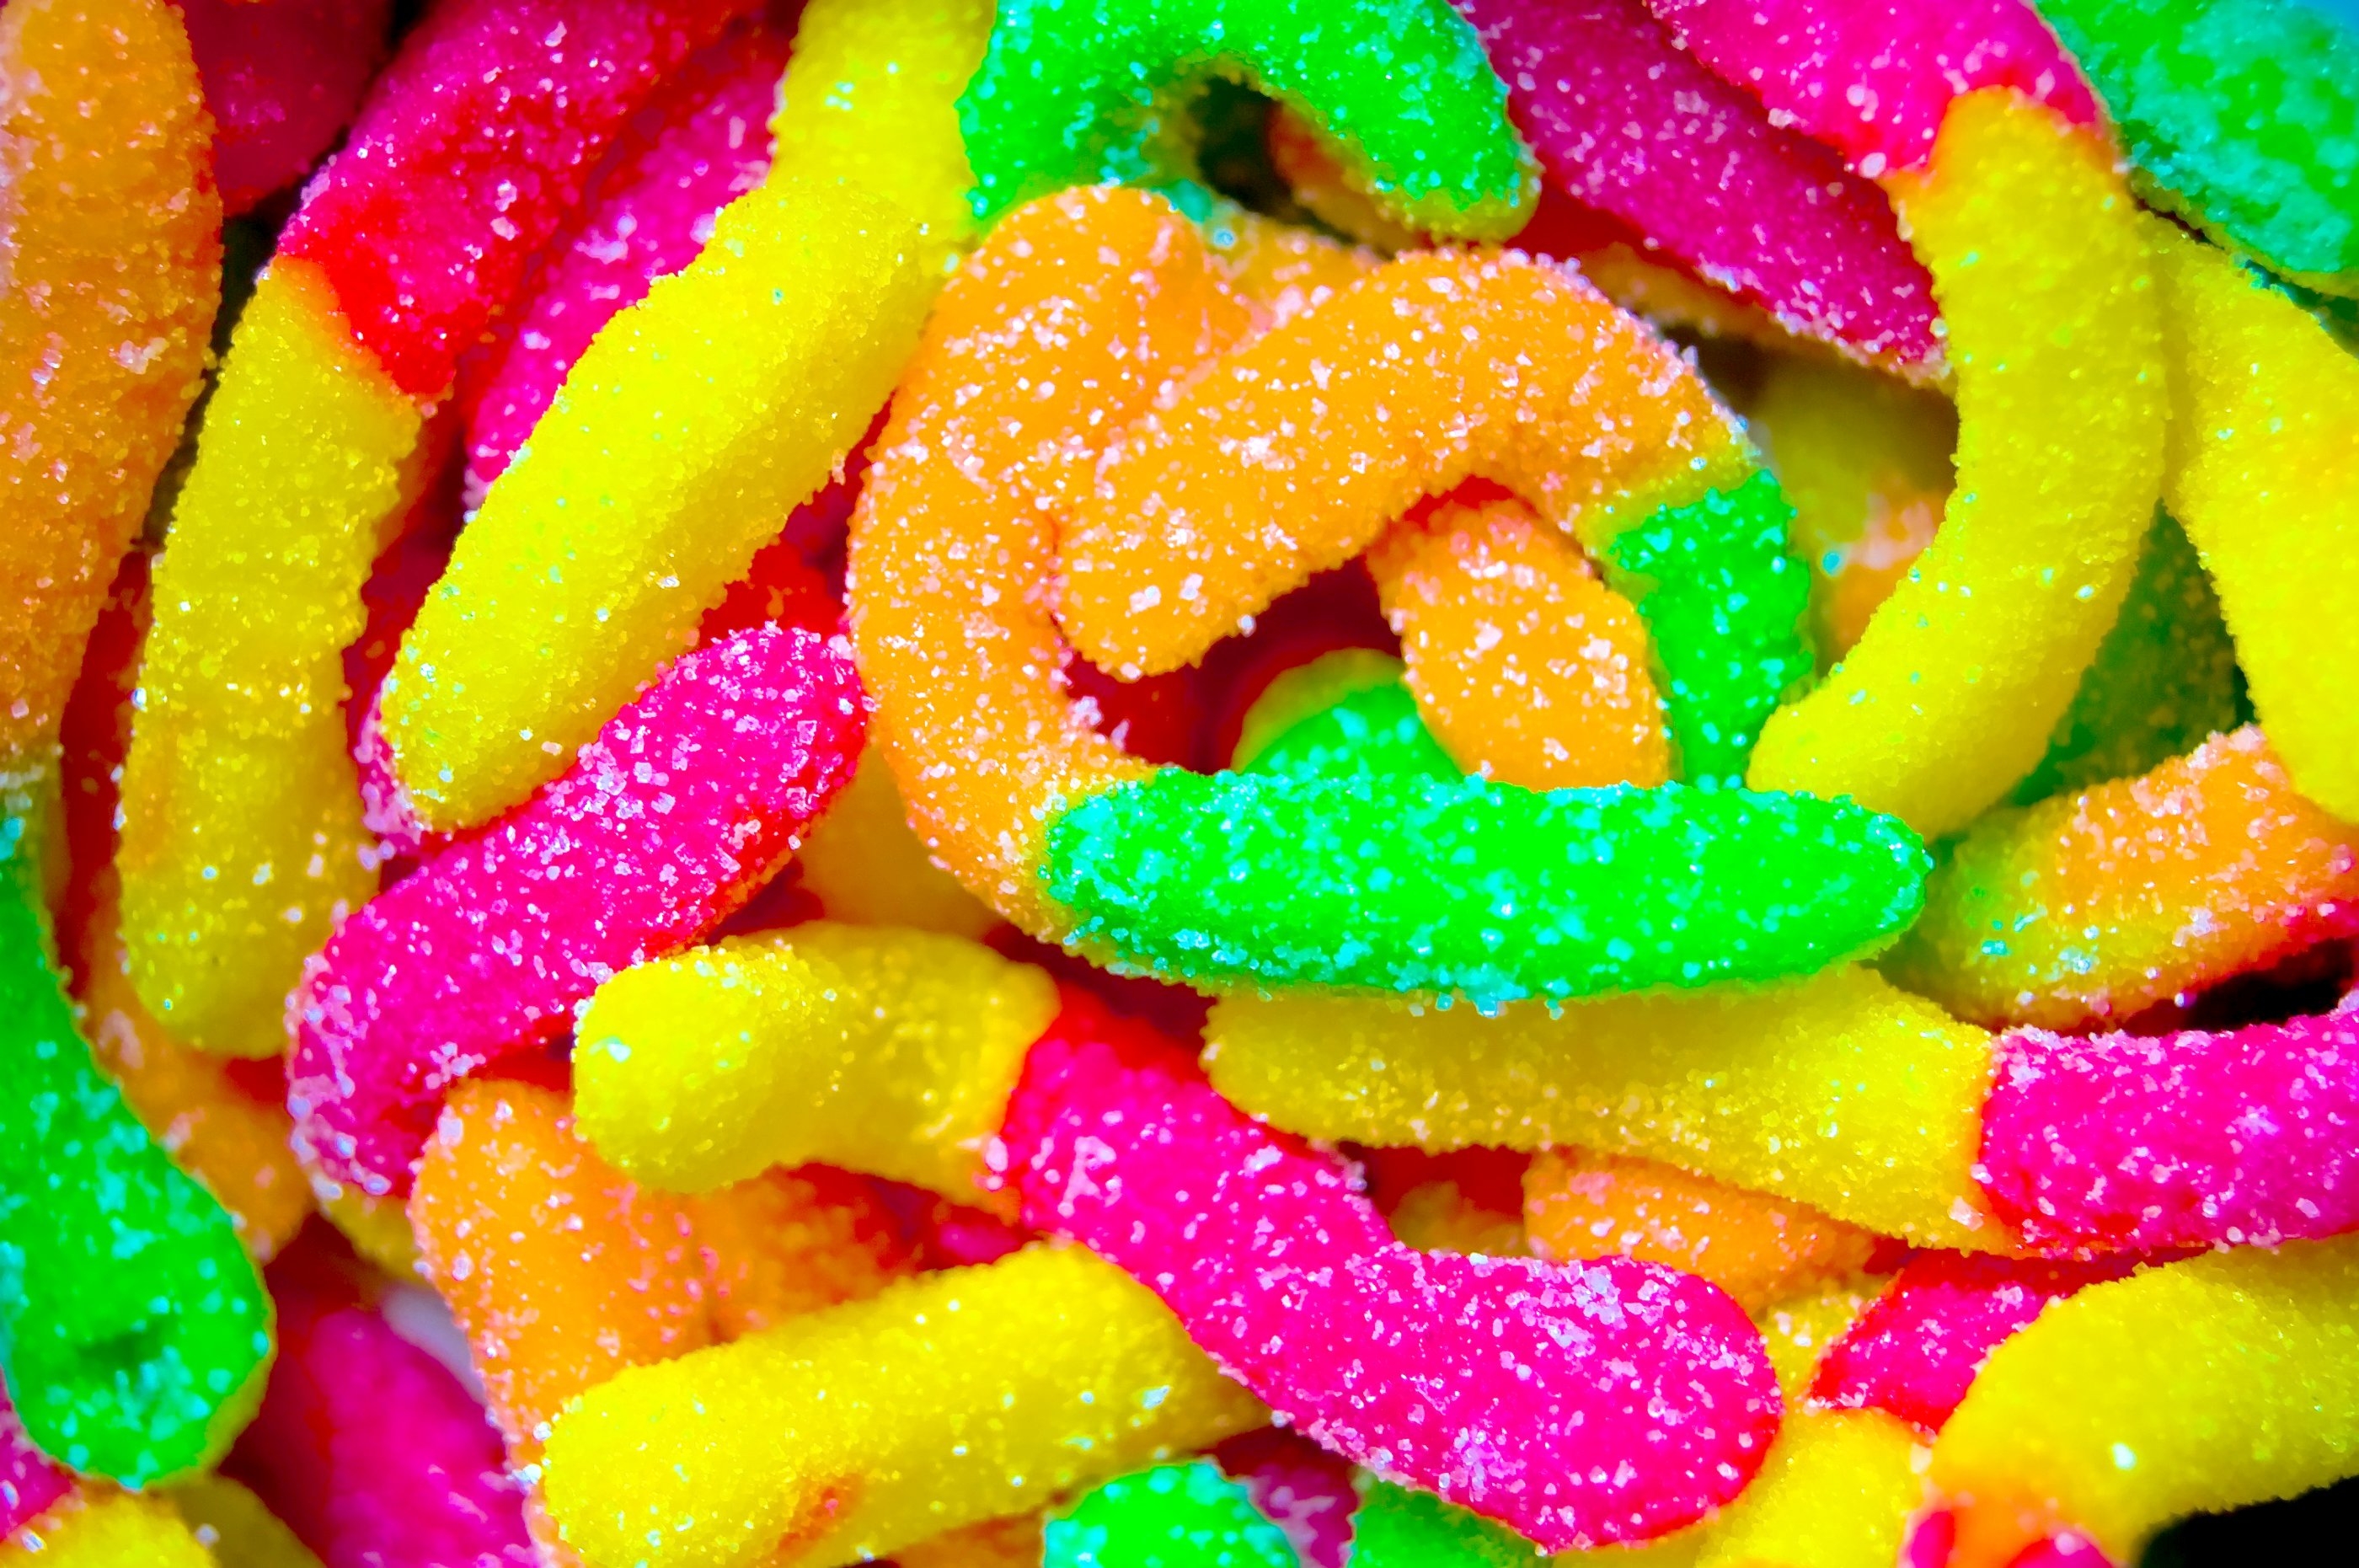 Delicious assortment of colorful candies on a desktop wallpaper.